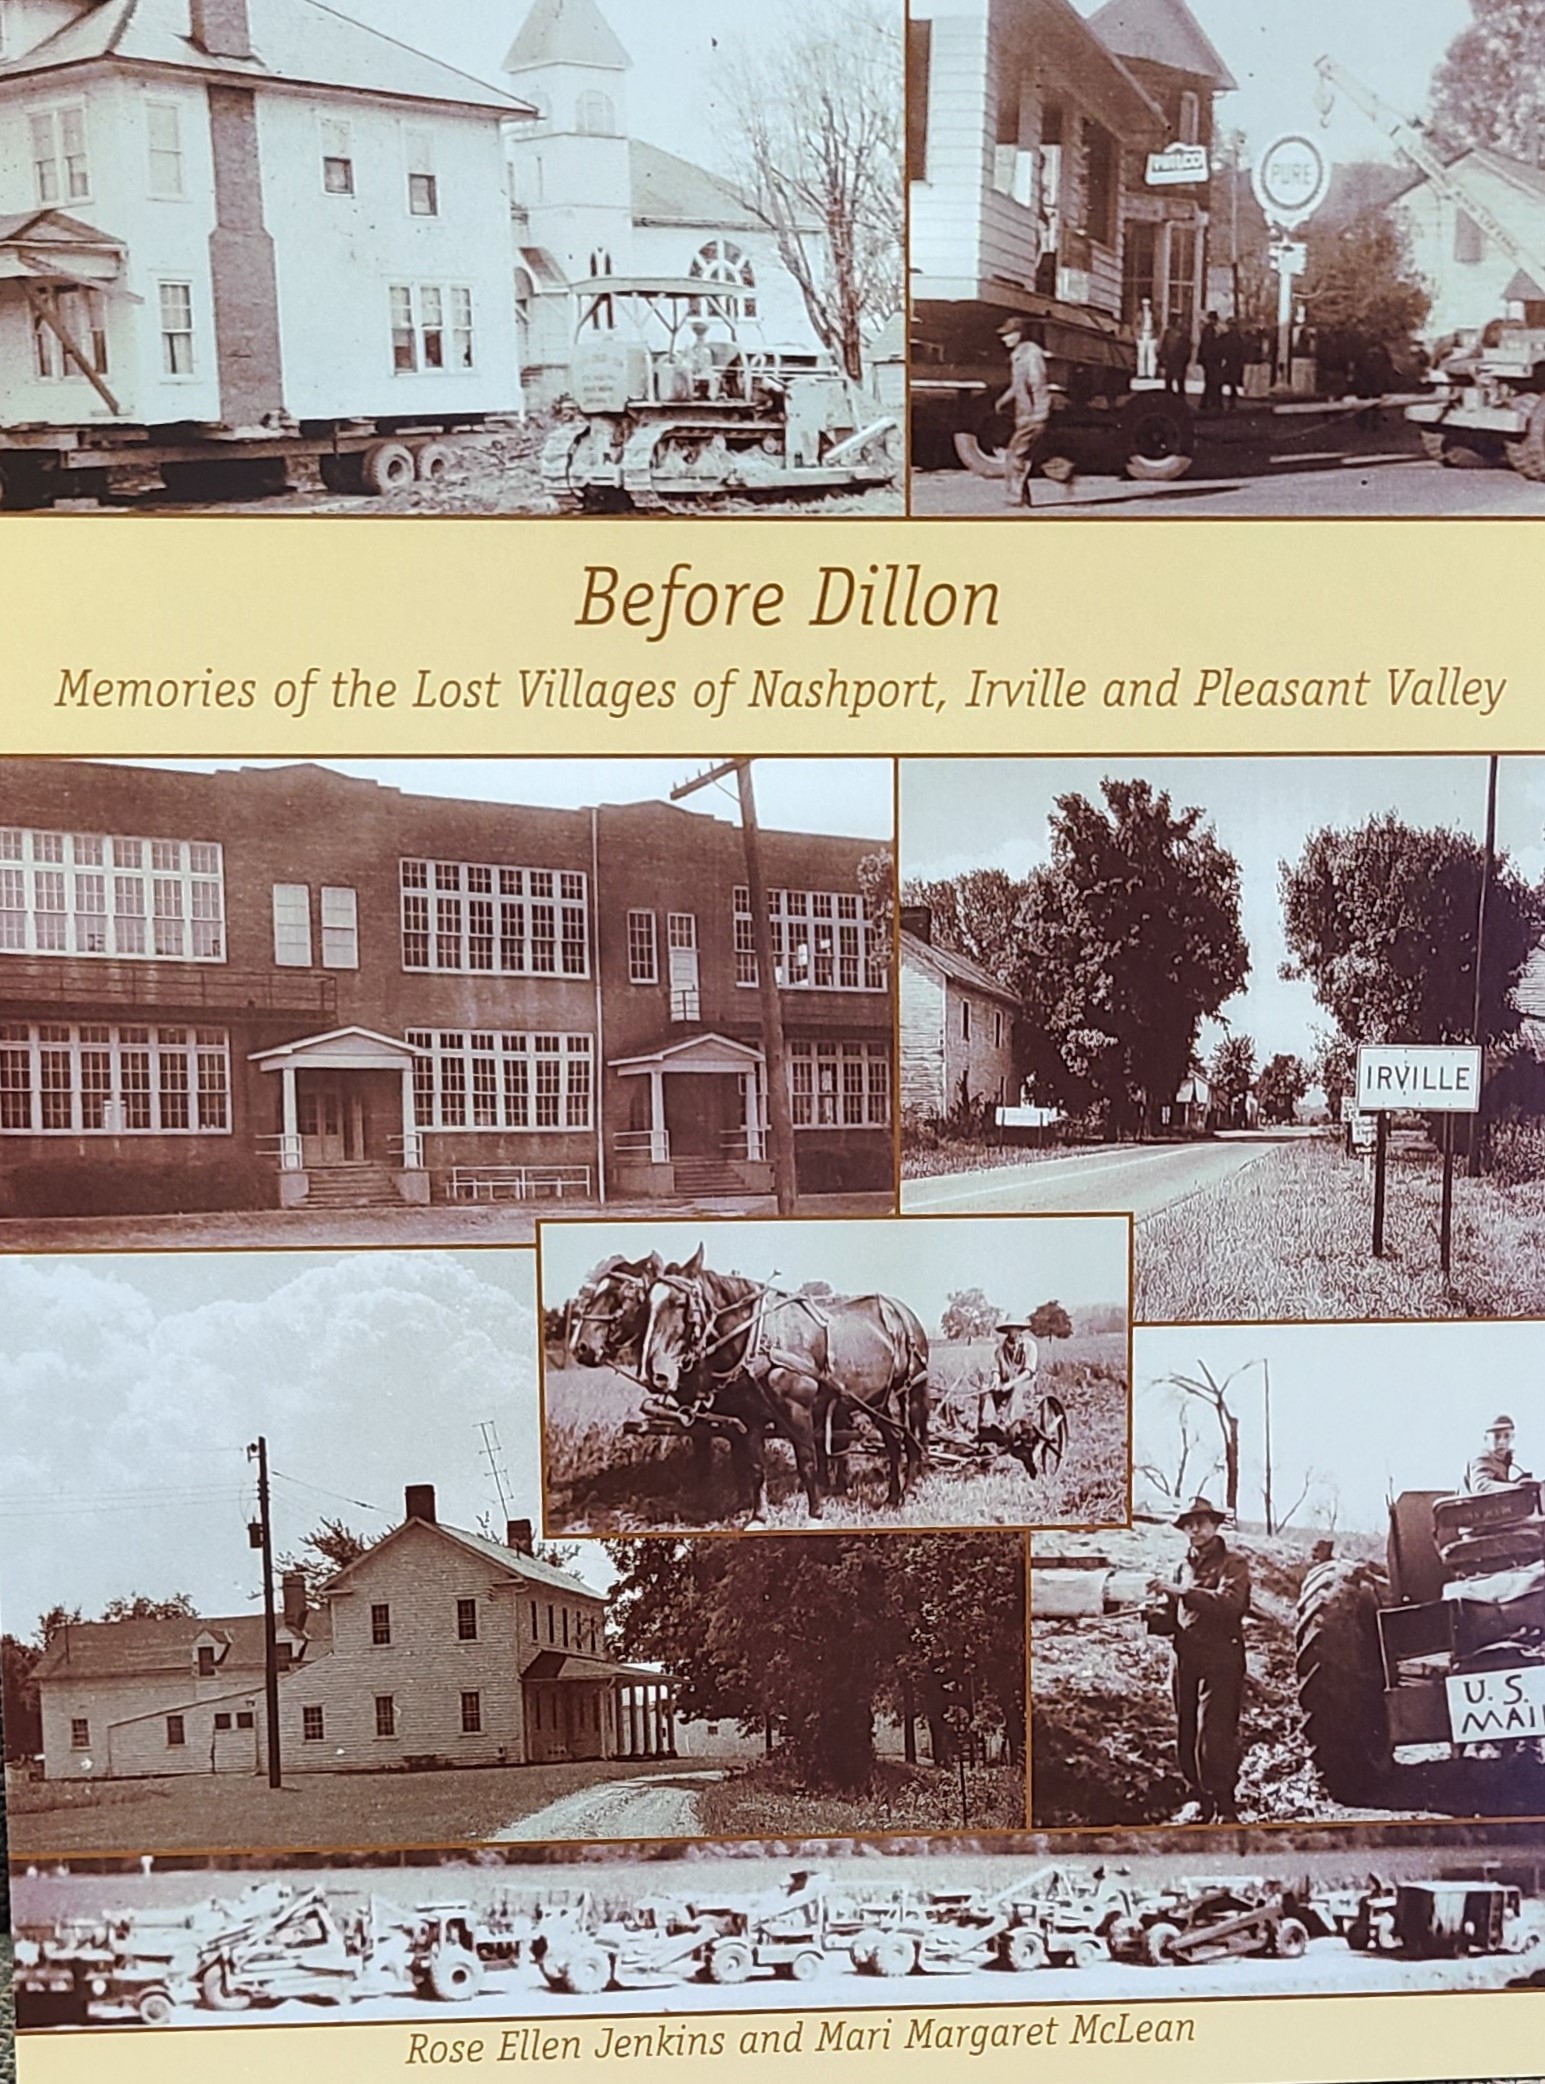 Before Dillon: Memories of the Lost Villages of Irville, Nashport, and Pleasant Valley